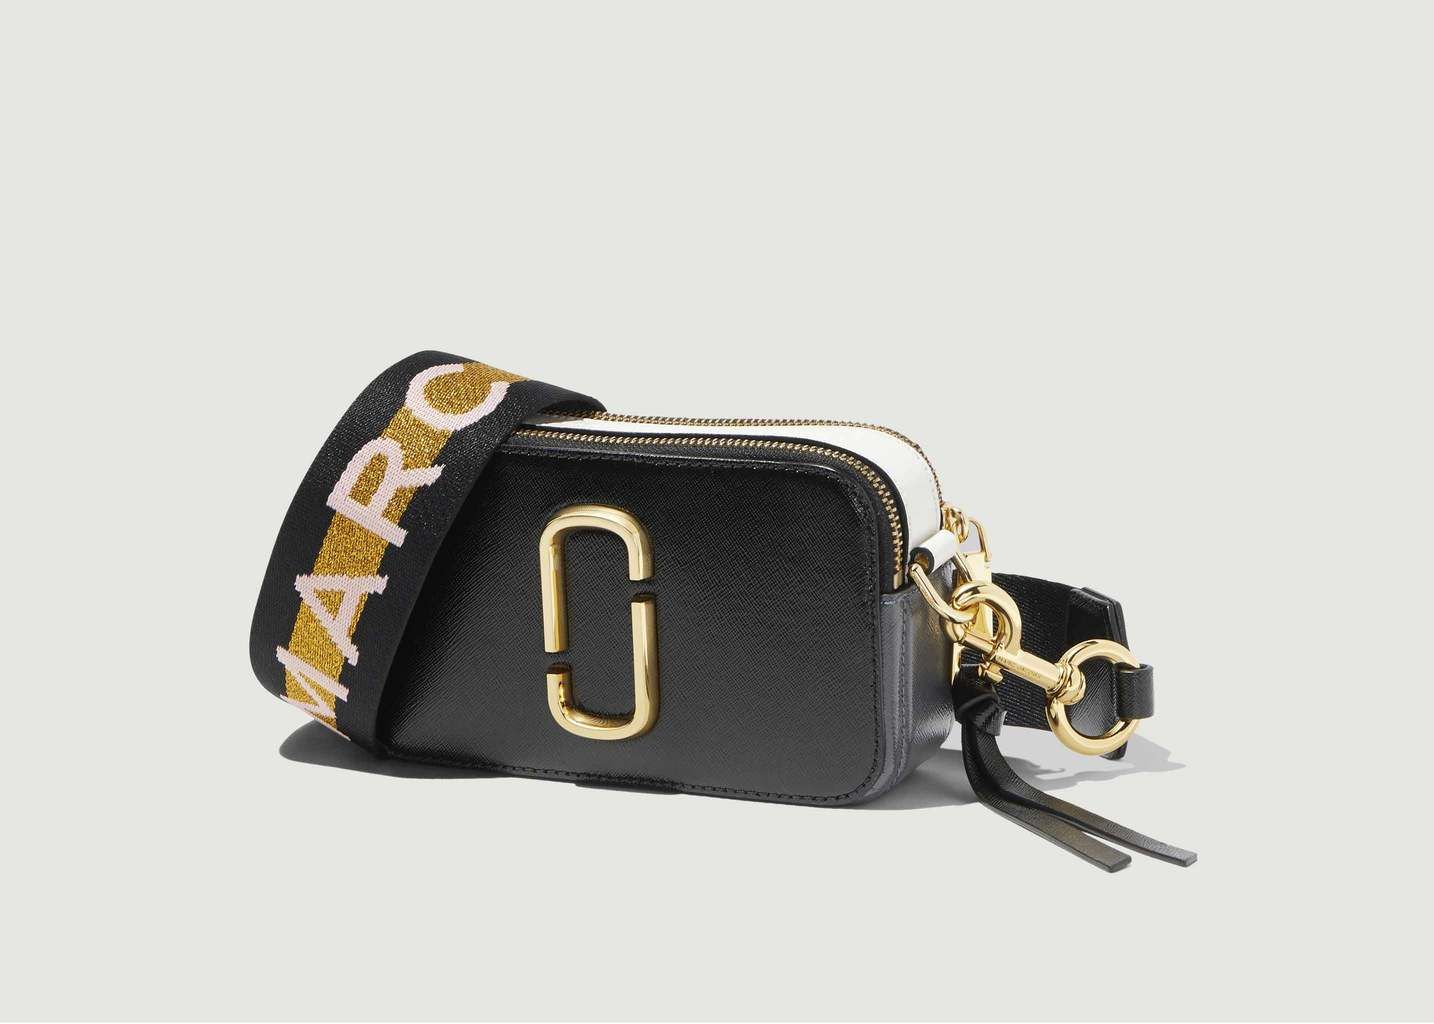 The Marc Jacobs Black the Logo Strap Snapshot Small Camera Bag